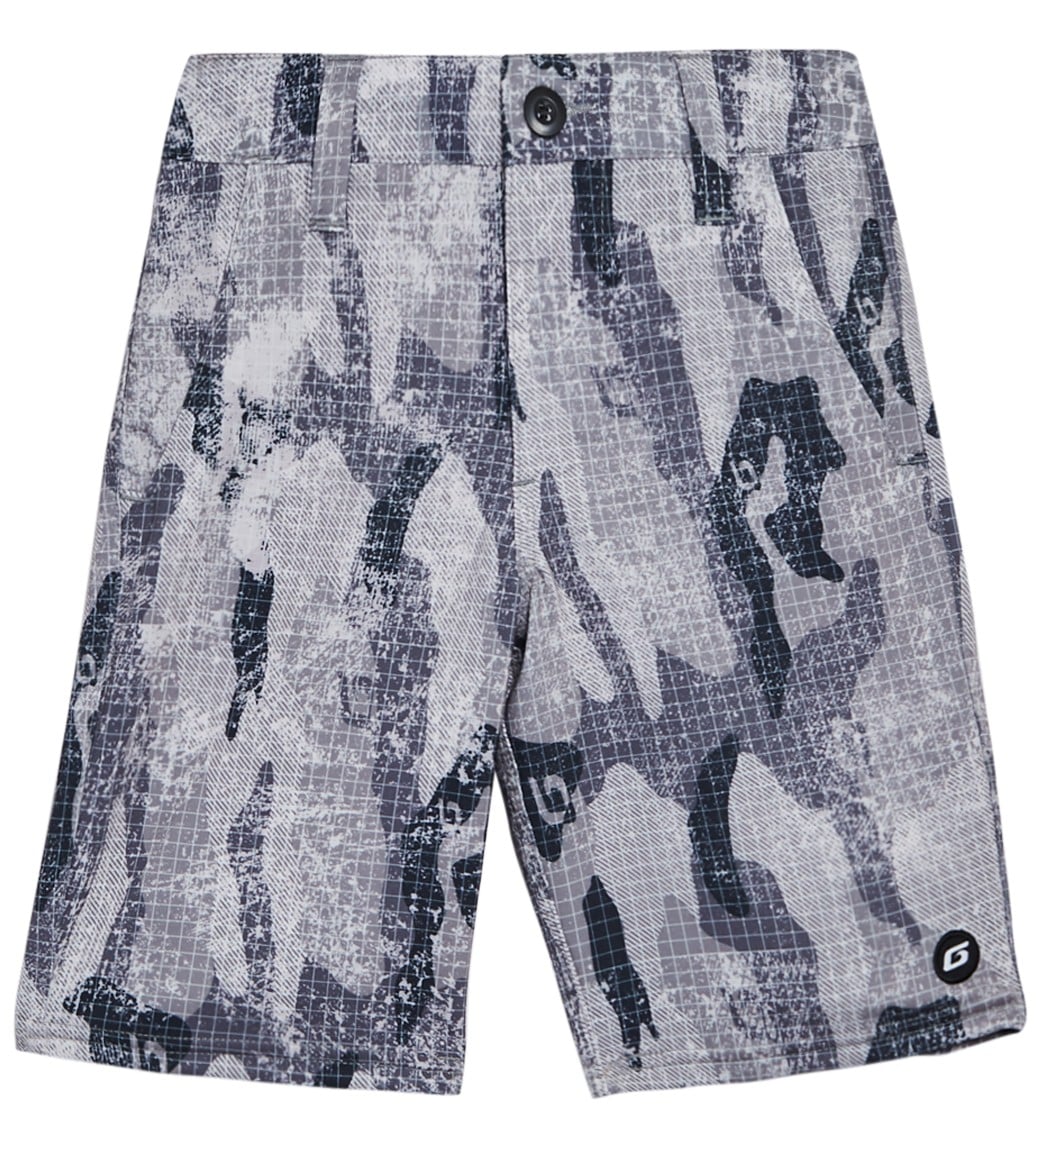 Grom Boys' Off Road Wet/Dry Short - Gray Camo Small 6/7 Polyester/Cotton - Swimoutlet.com